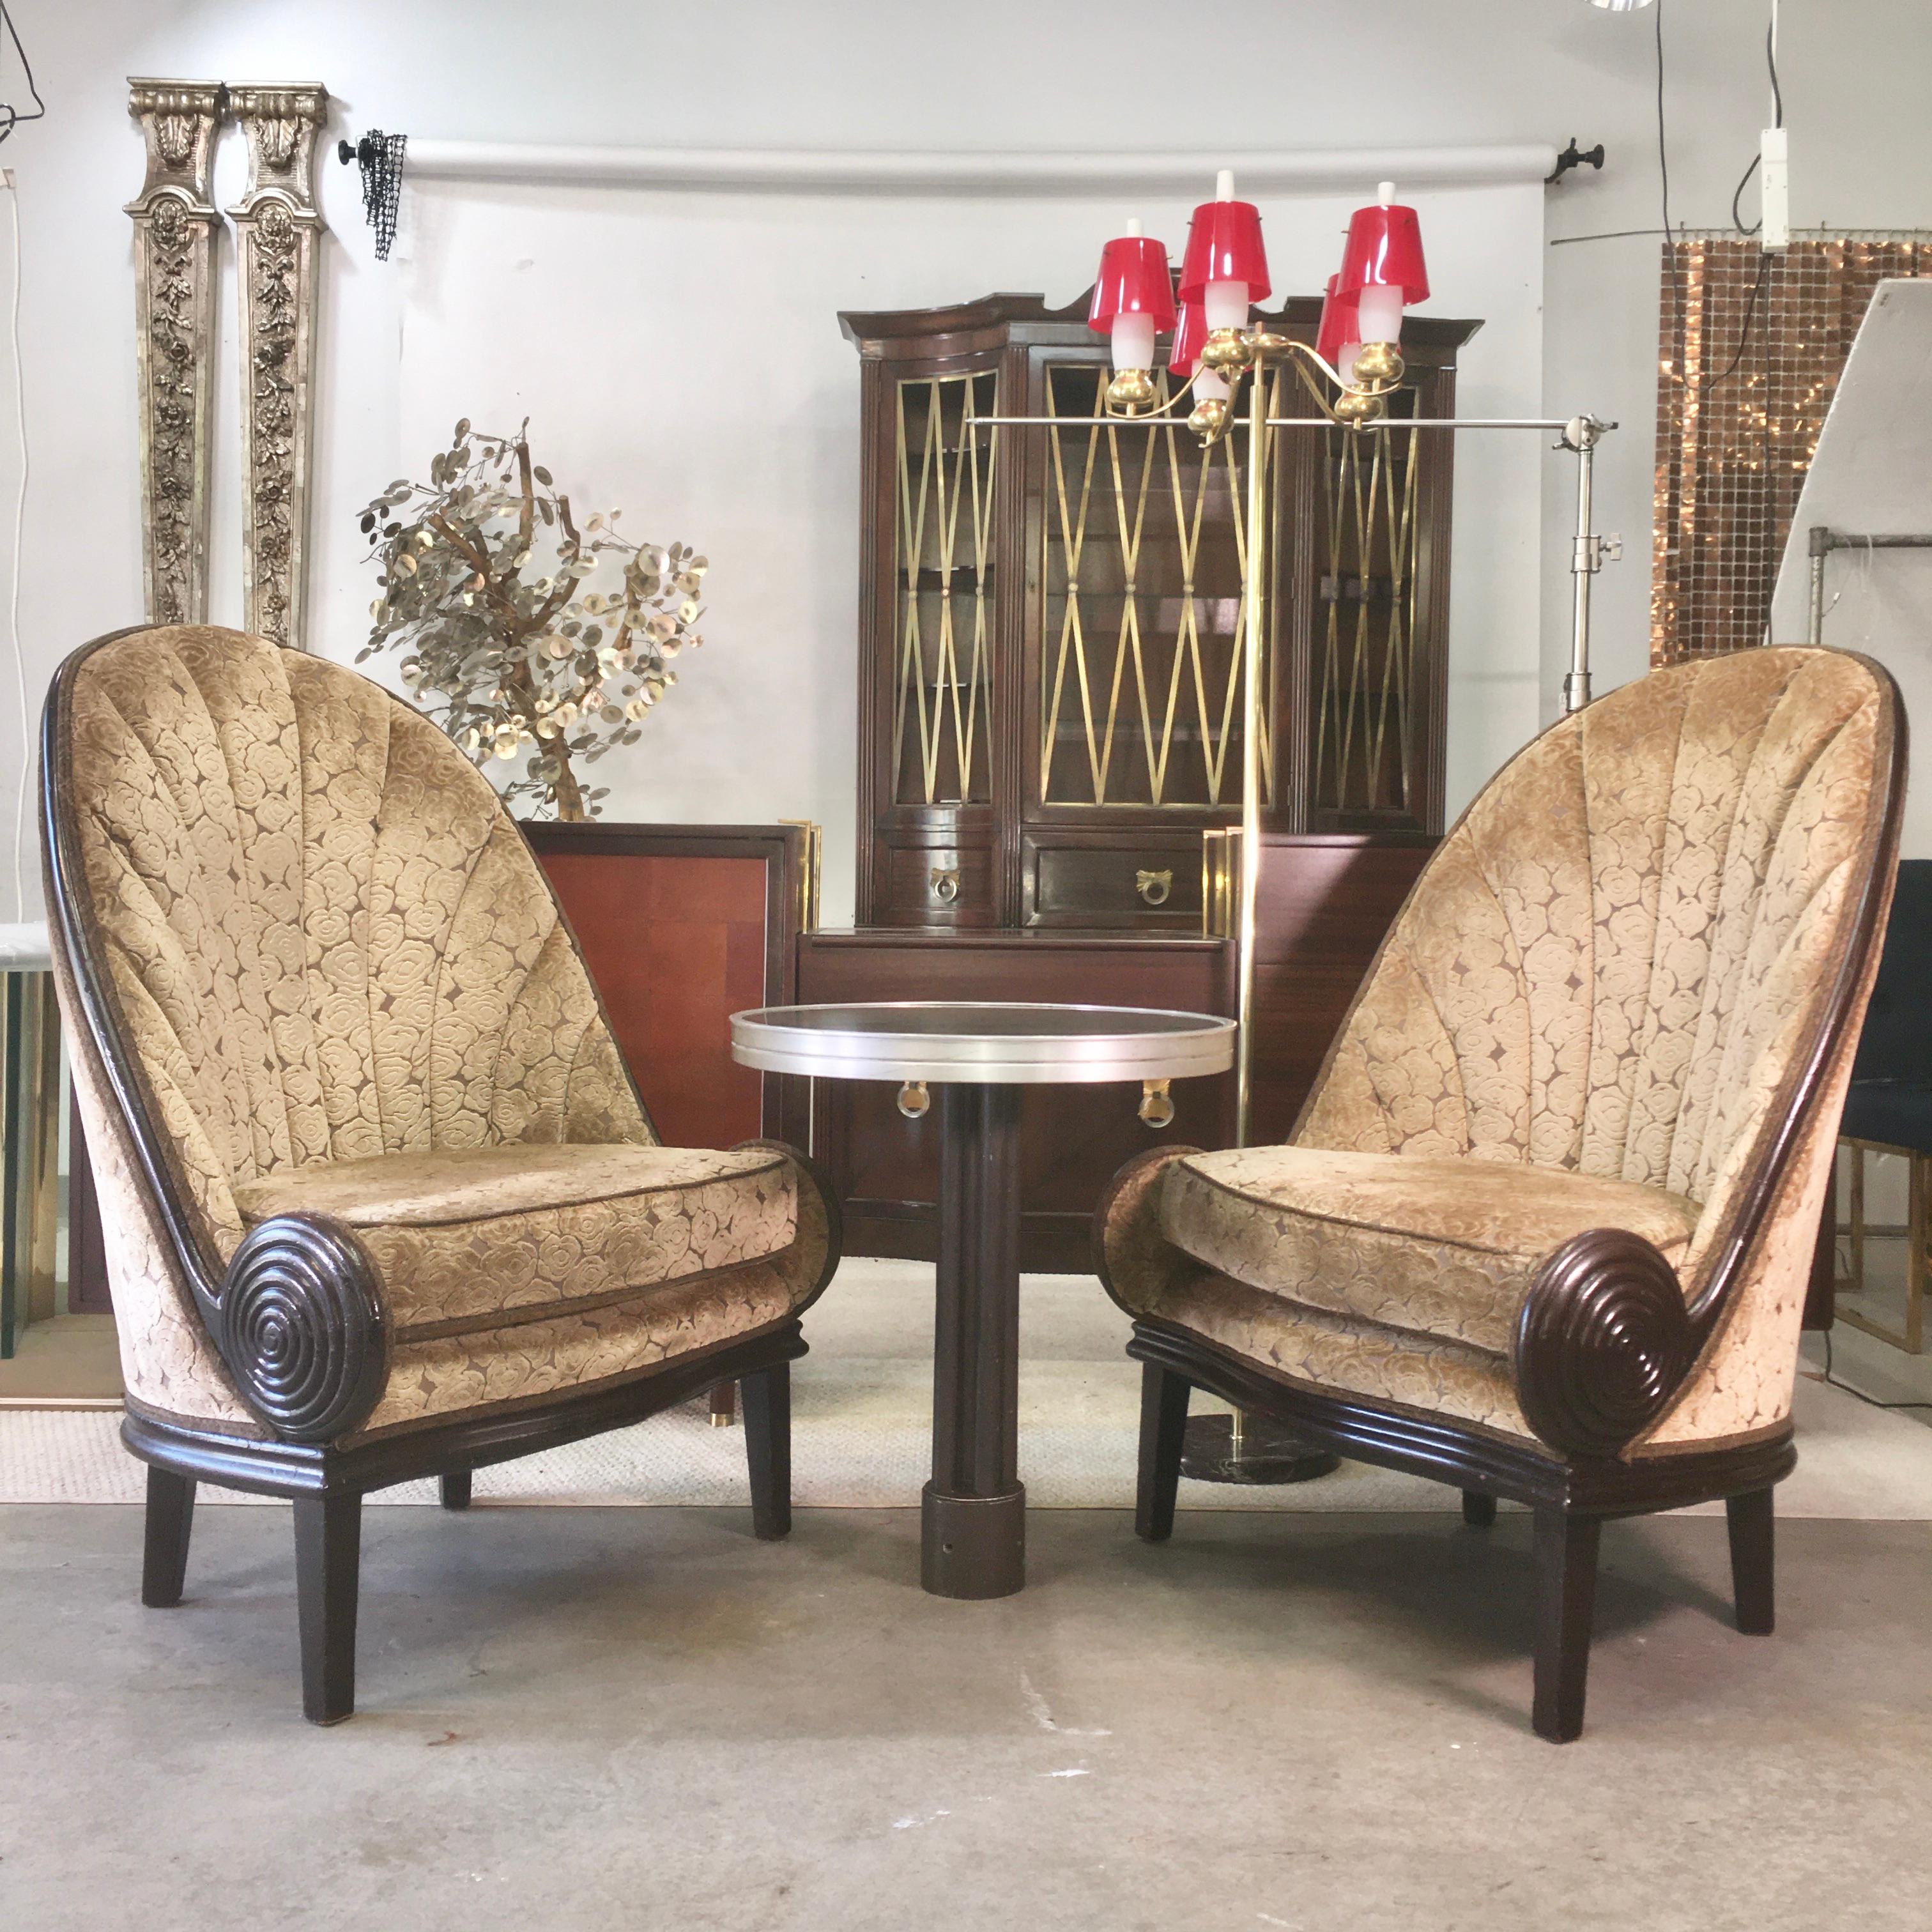 We are fortunate to have acquired two pair of these amazing gondola chairs from the glamorous and historic Waldorf Astoria Hotel.
There were only a total of 12 of these generously scaled chairs upholstered in an art deco cut velvet and were situated